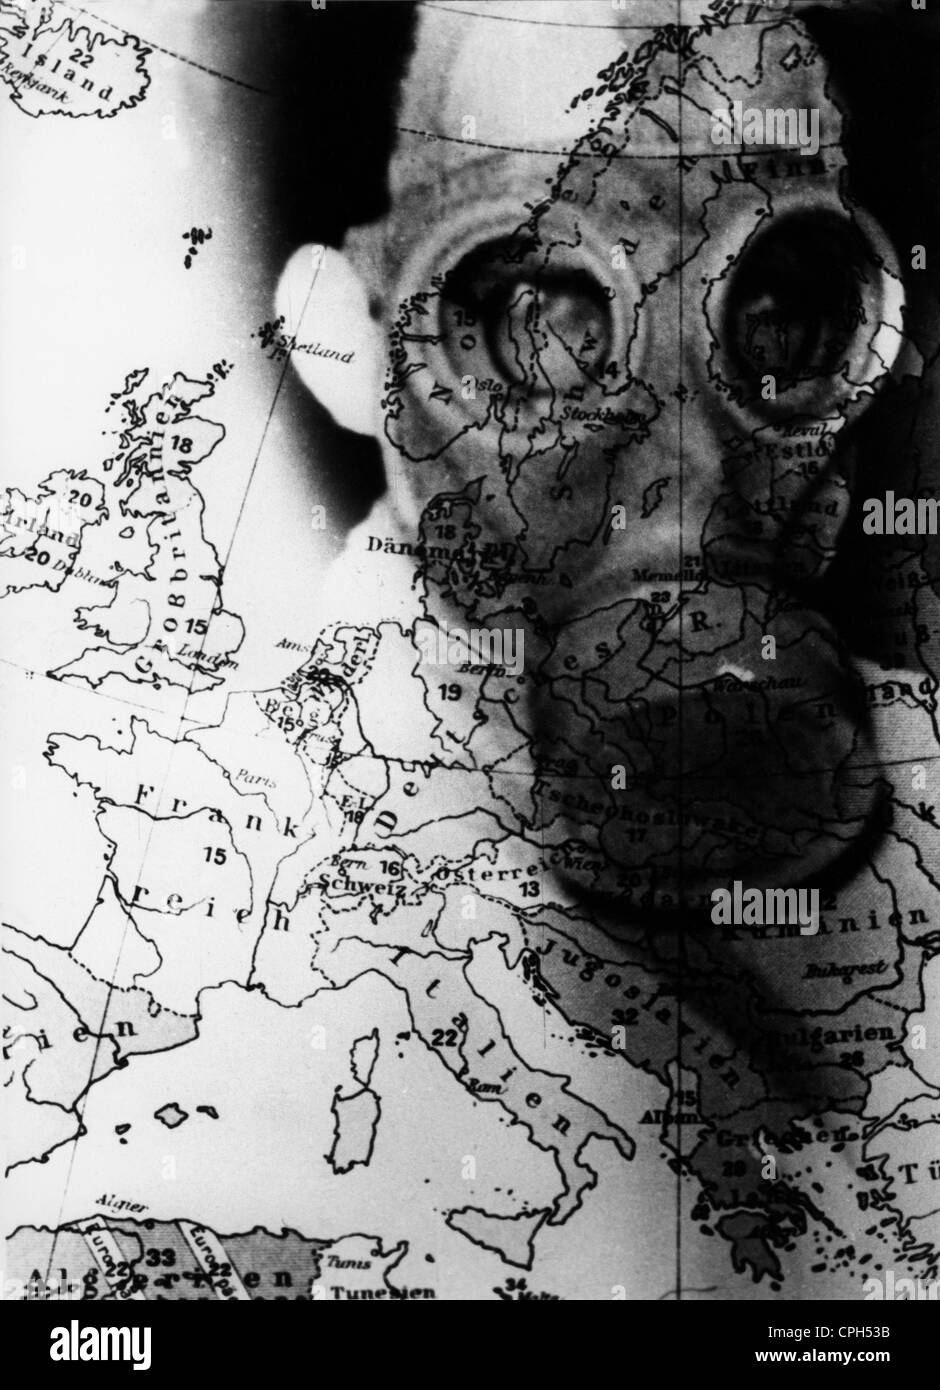 Nazism / National Socialism, propaganda, man with gas mask, on a map of Europe, poster, unknown origin, 1930s, Additional-Rights-Clearences-Not Available Stock Photo